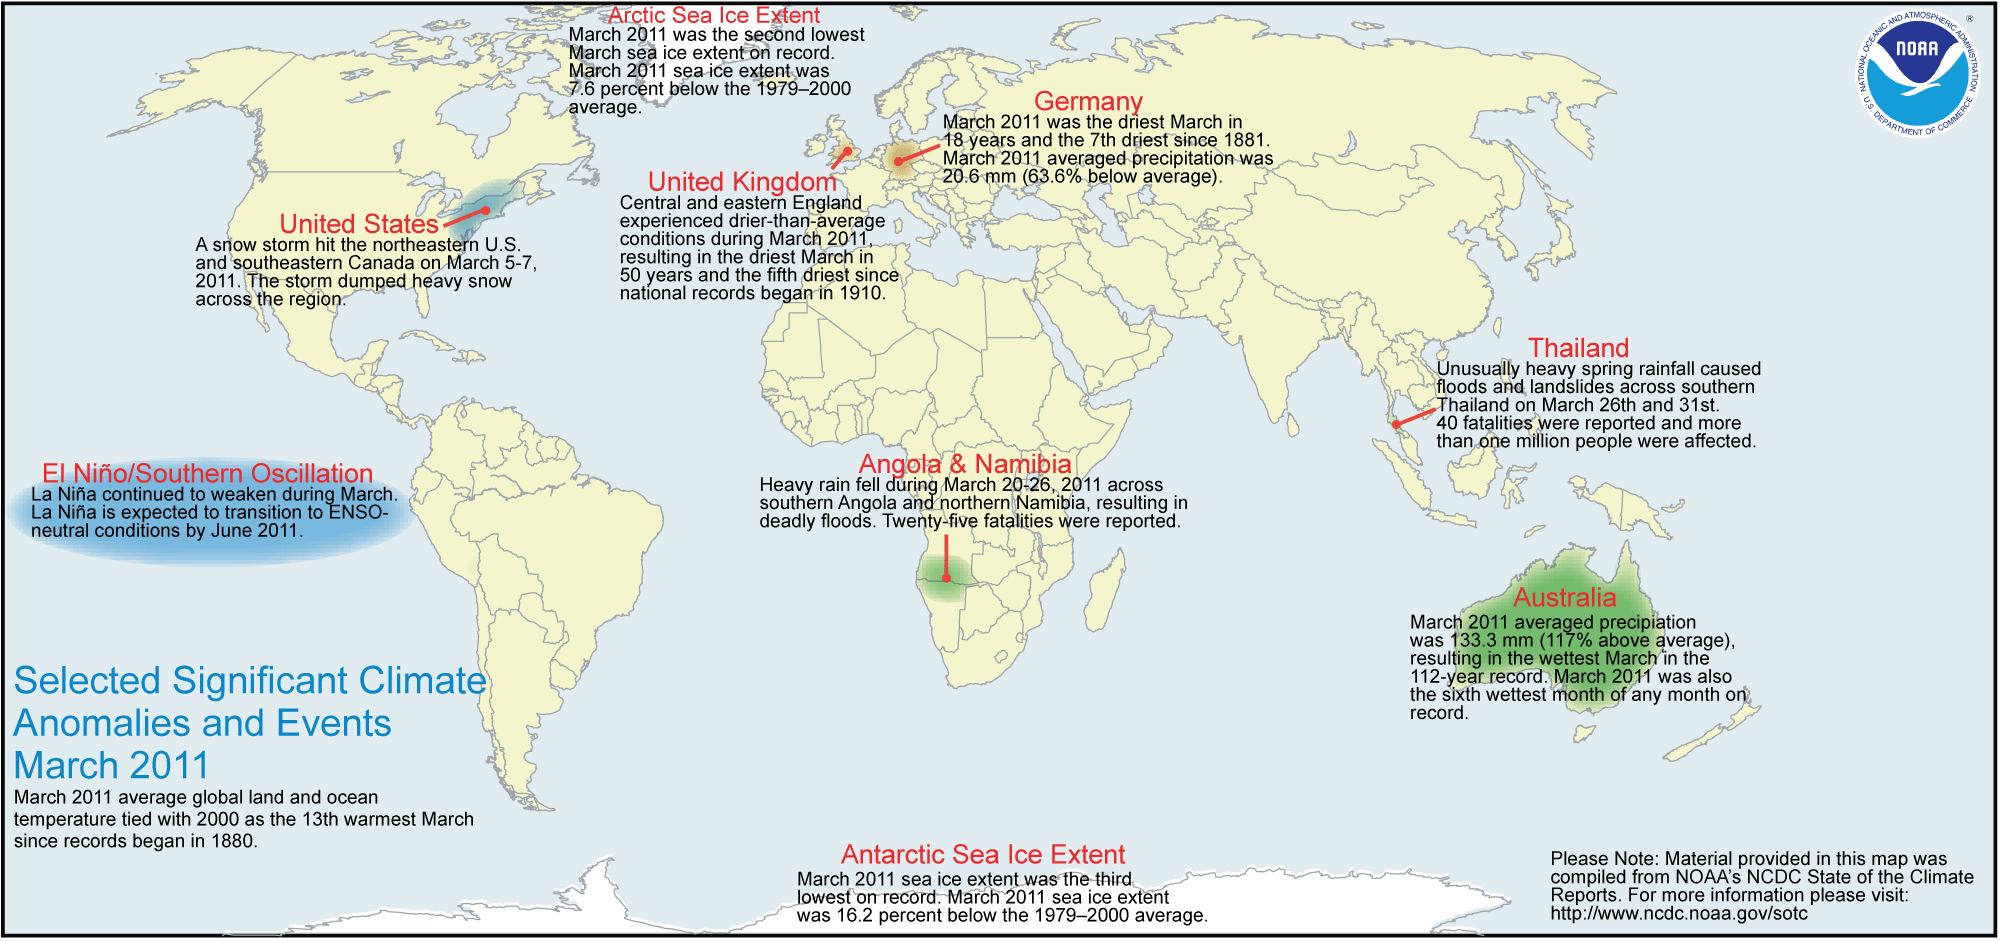 Selected Significant Climate Anomalies and Events, March 2011